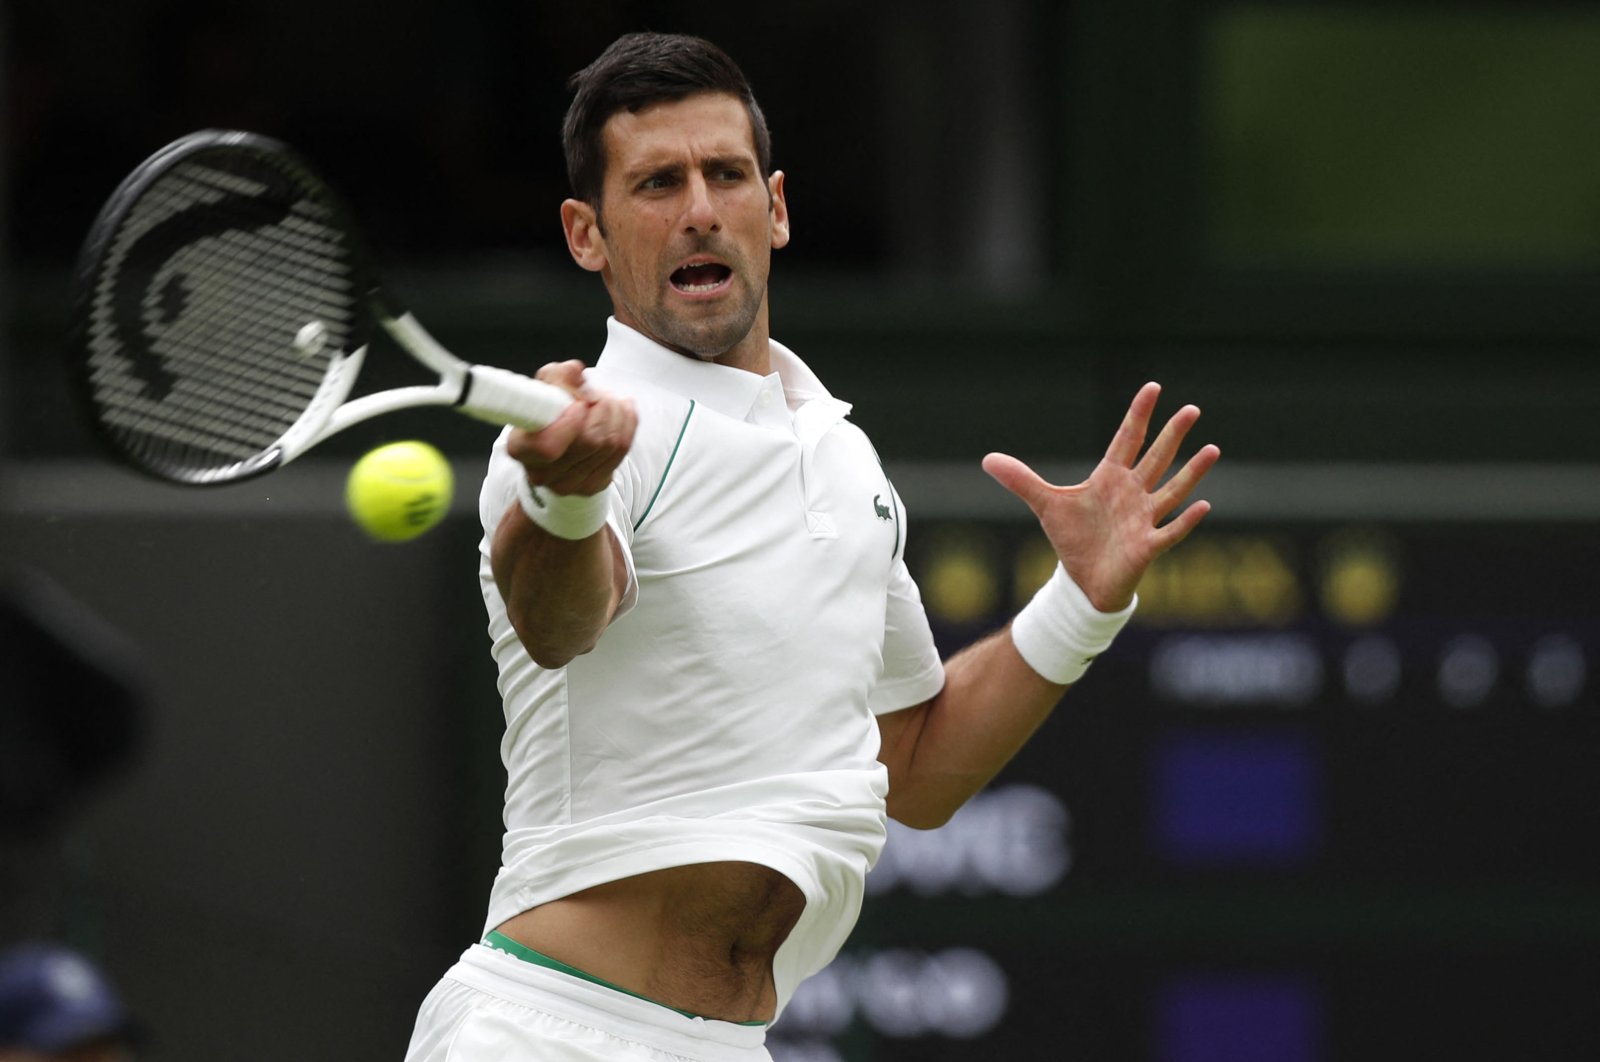 Novak Djokovic in action against Kwon Soon-woo at the Wimbledon Championships, London, England, June 27, 2022. (AFP Photo)